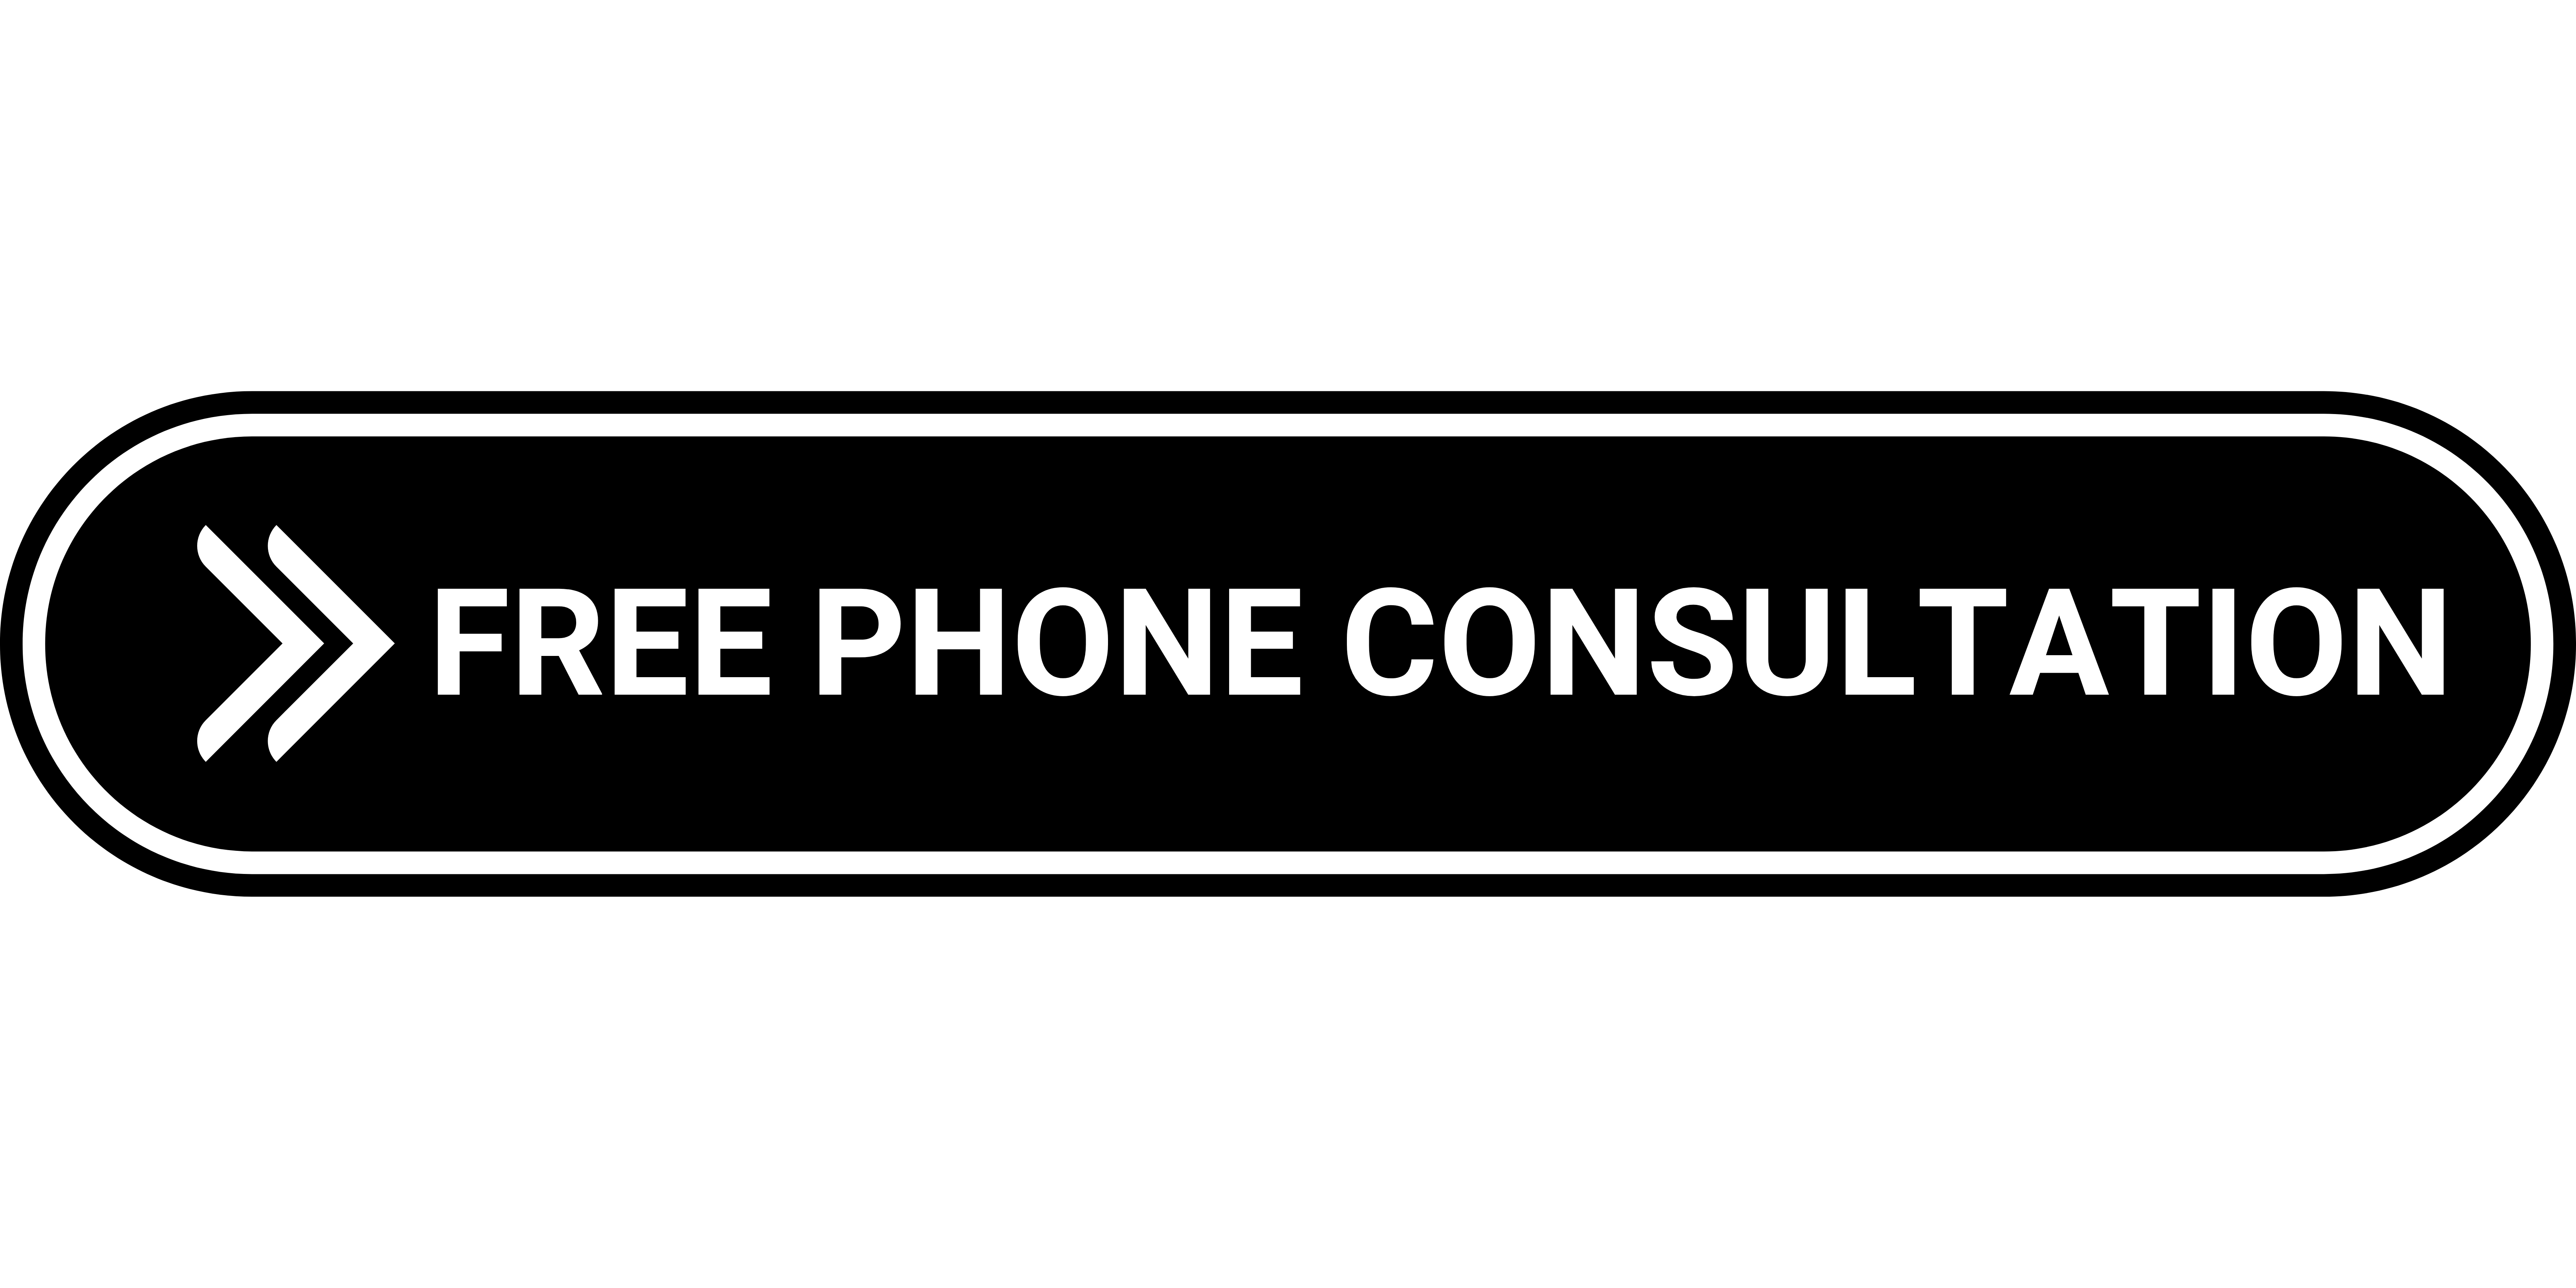 Free Phone Consultation button that links to scheduling page.